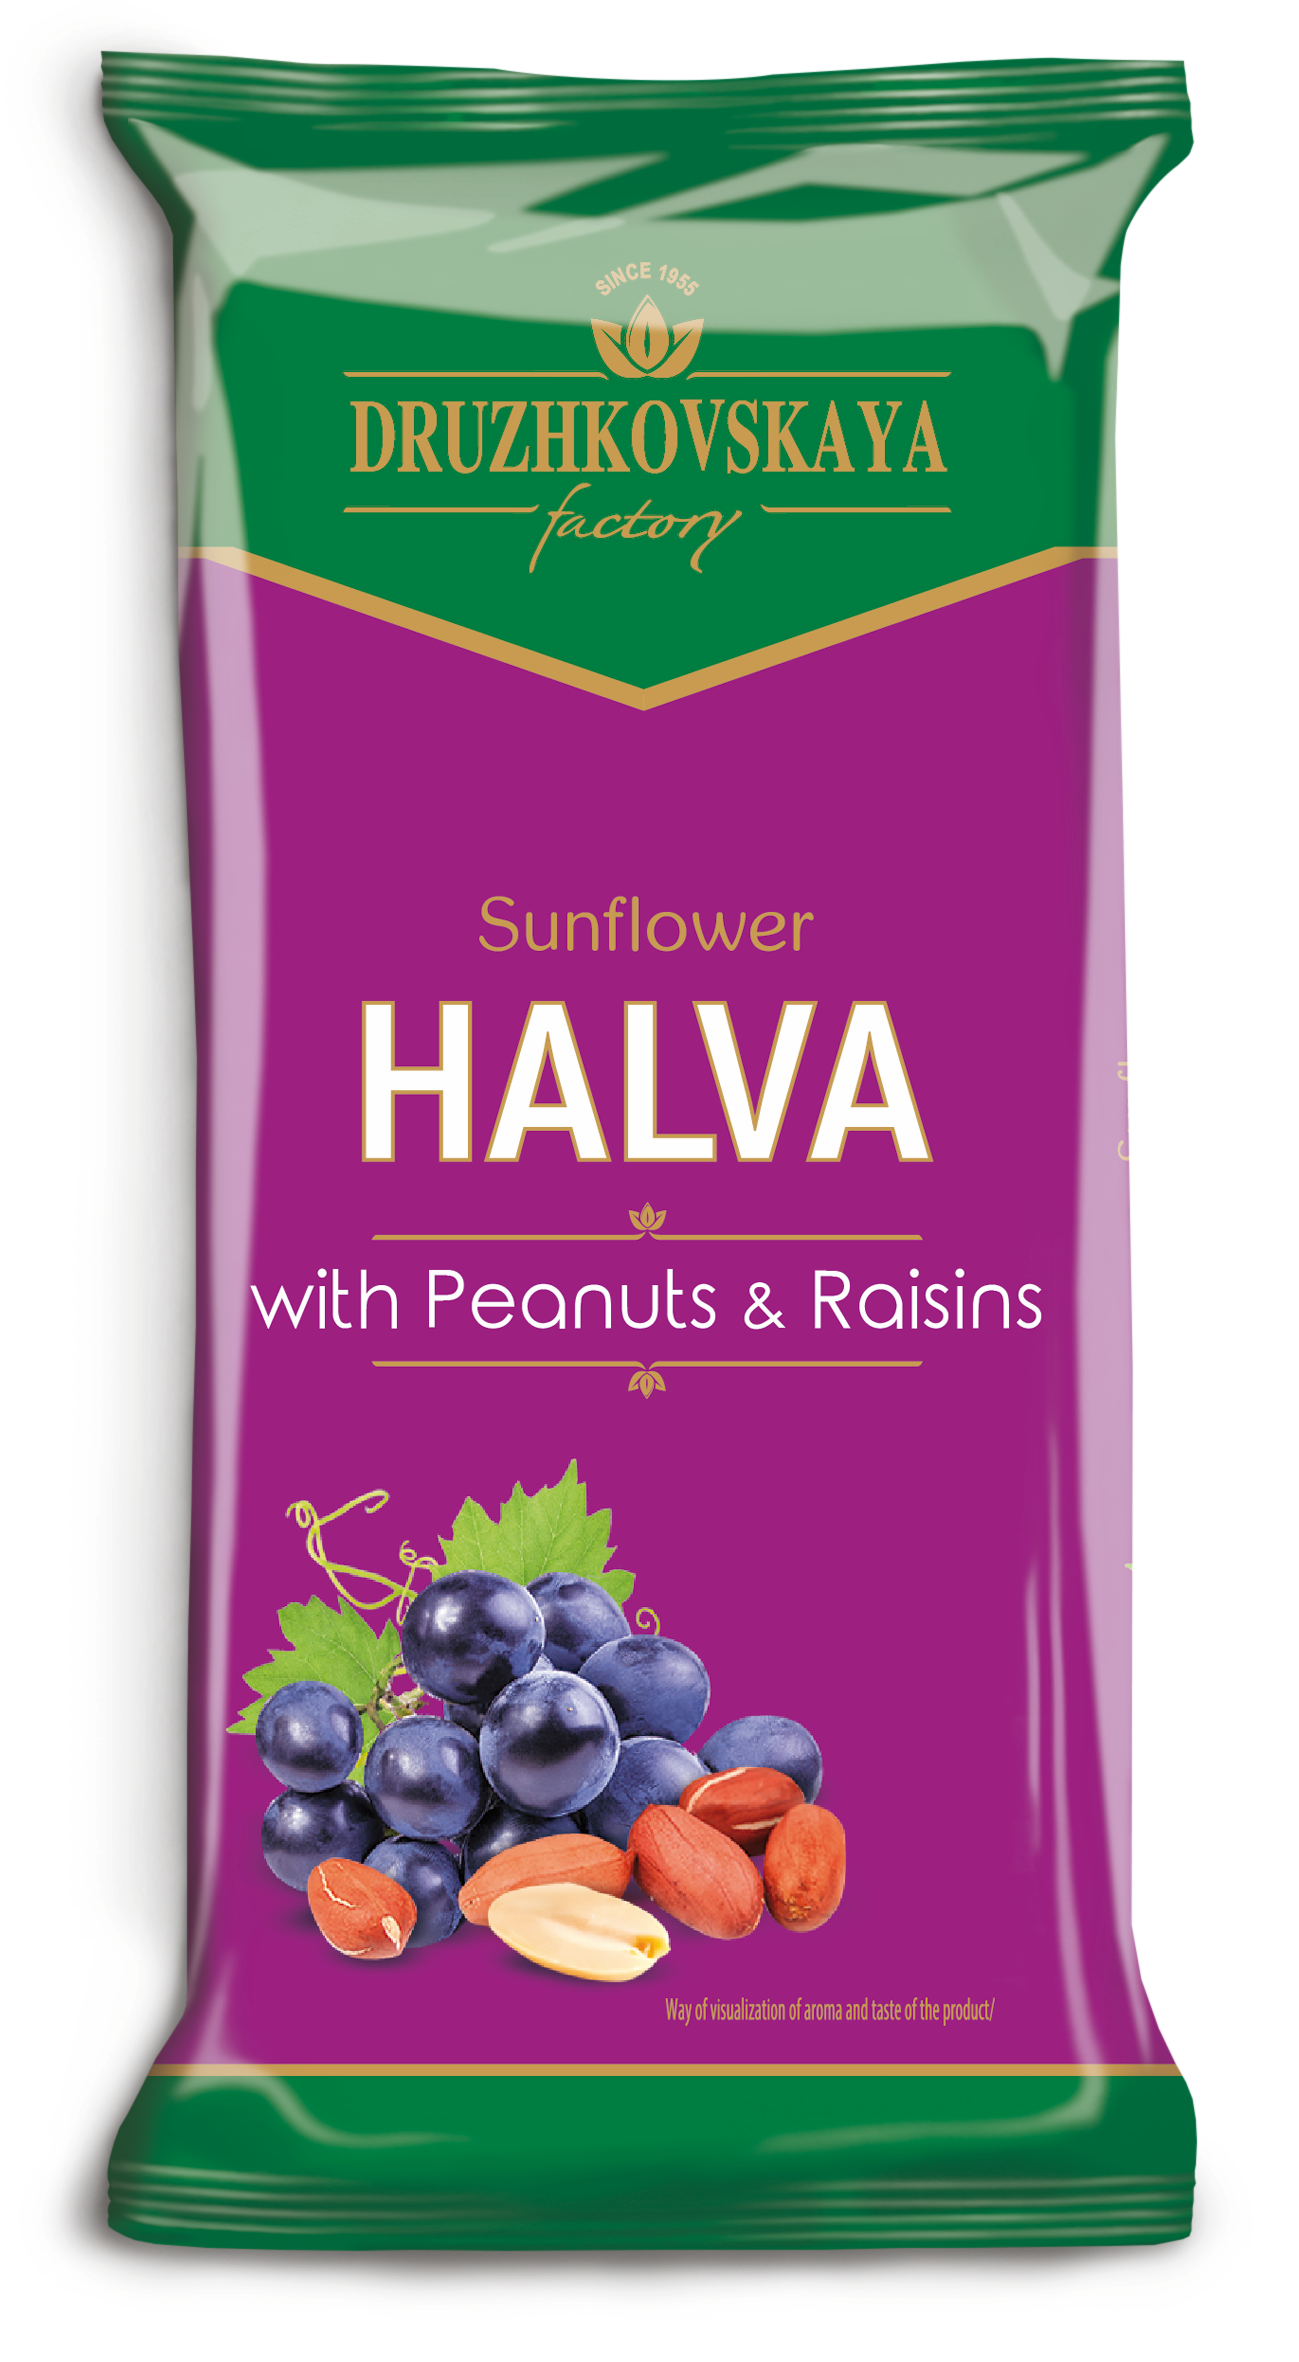 Sunflower Halva with Peanuts and Raisins Packed in Flow-pack, 300 g